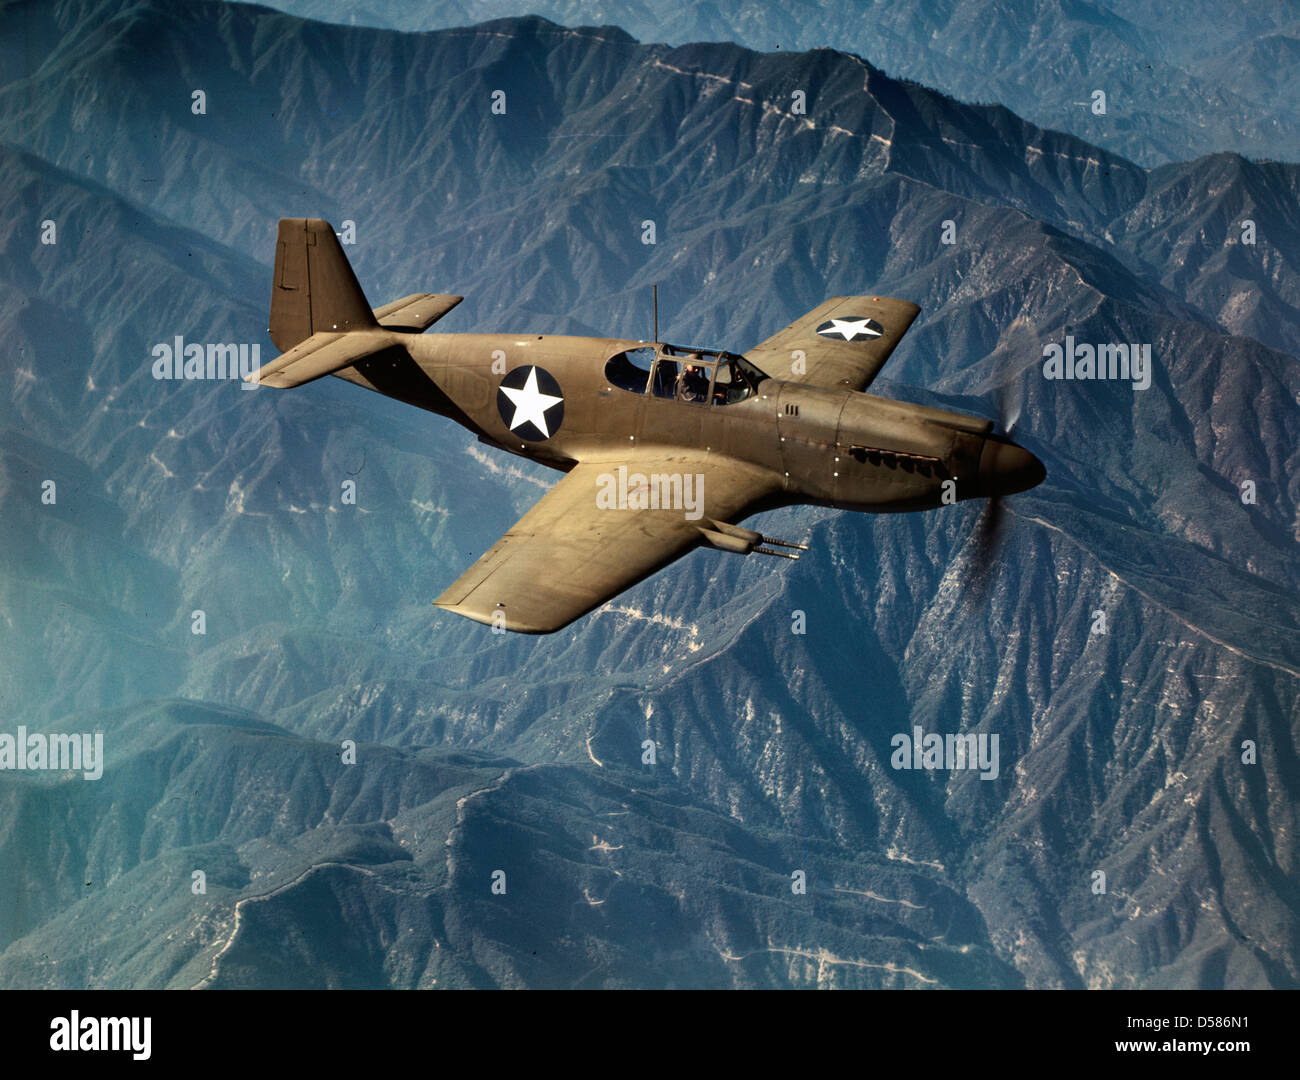 P-51 'Mustang' fighter in flight, Inglewood, Calif. The 'Mustang', built by North American Aviation, Incorporated, is the only American-built fighter used by the Royal Air Force of Great Britain, circa 1942 Stock Photo